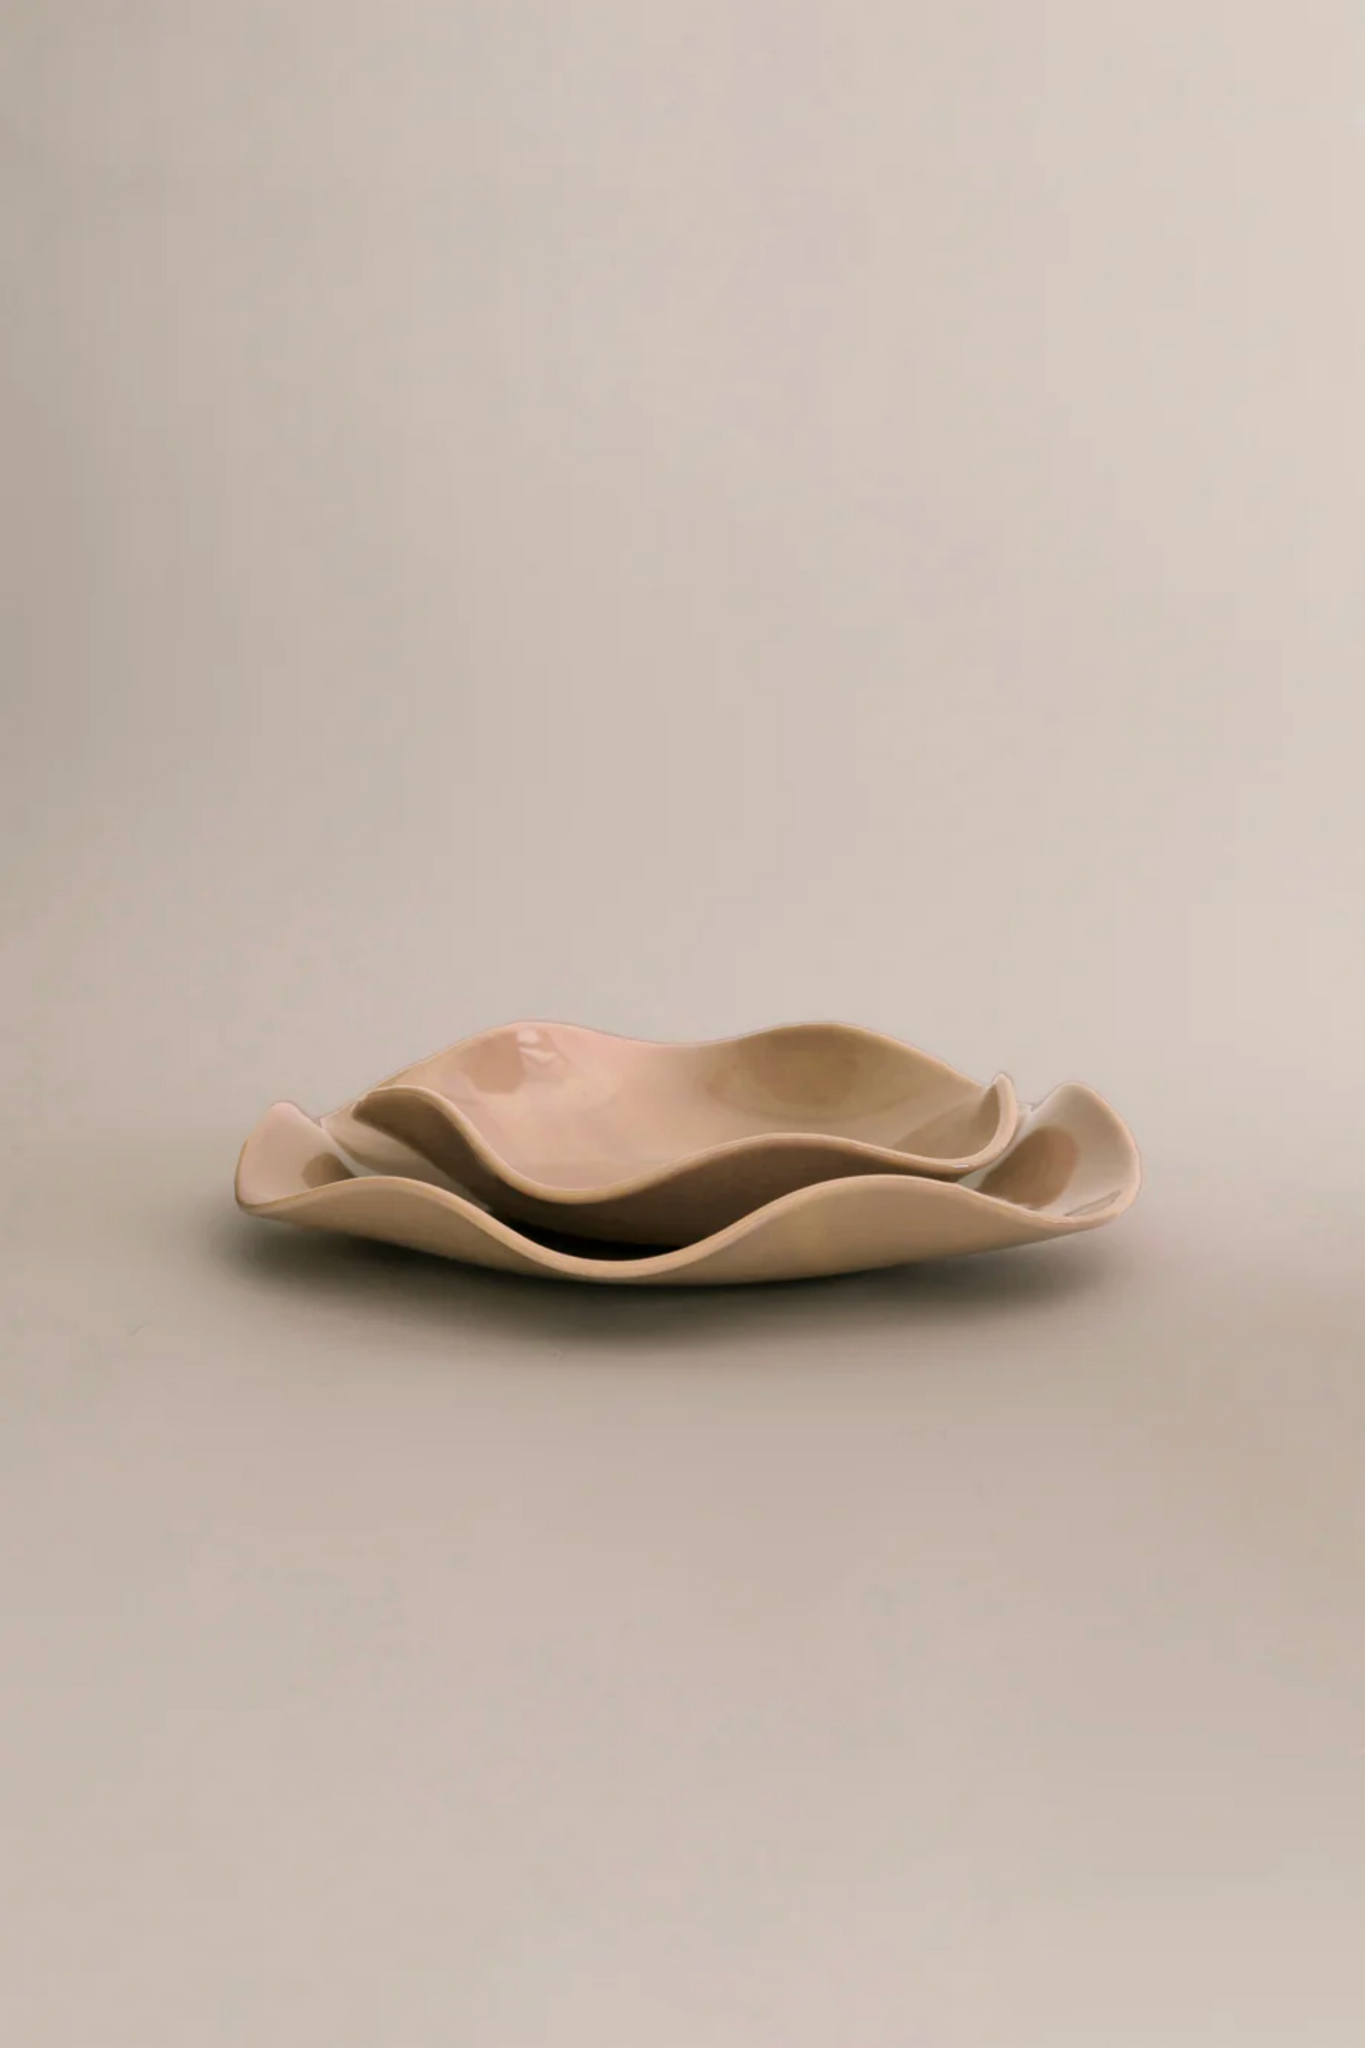 Large Petal Plate - Almond Opaque Sophie Lou Jacobsen, shown stacked with small petal plate